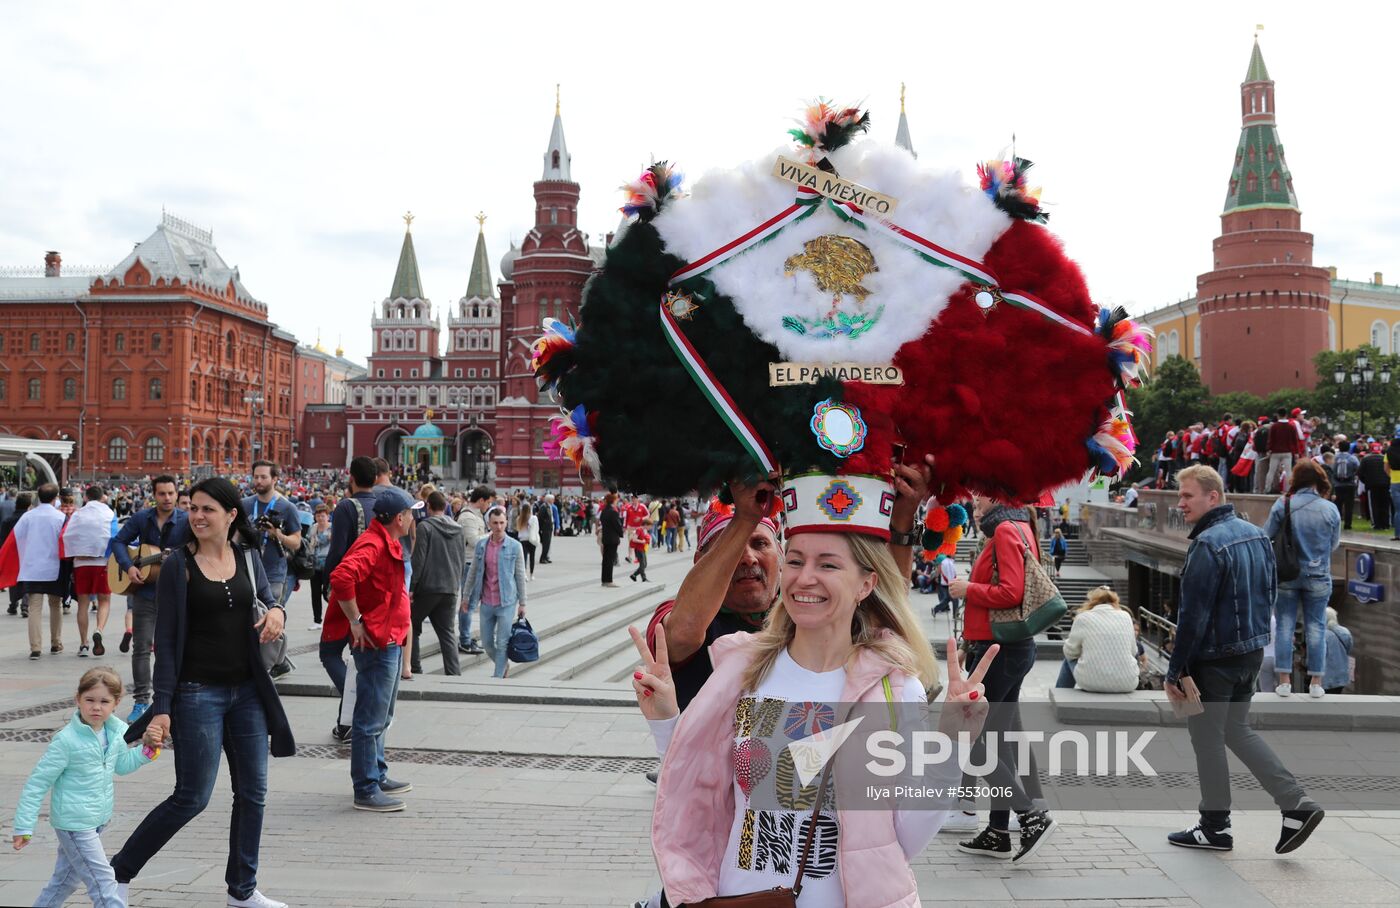 Russia World Cup Fans